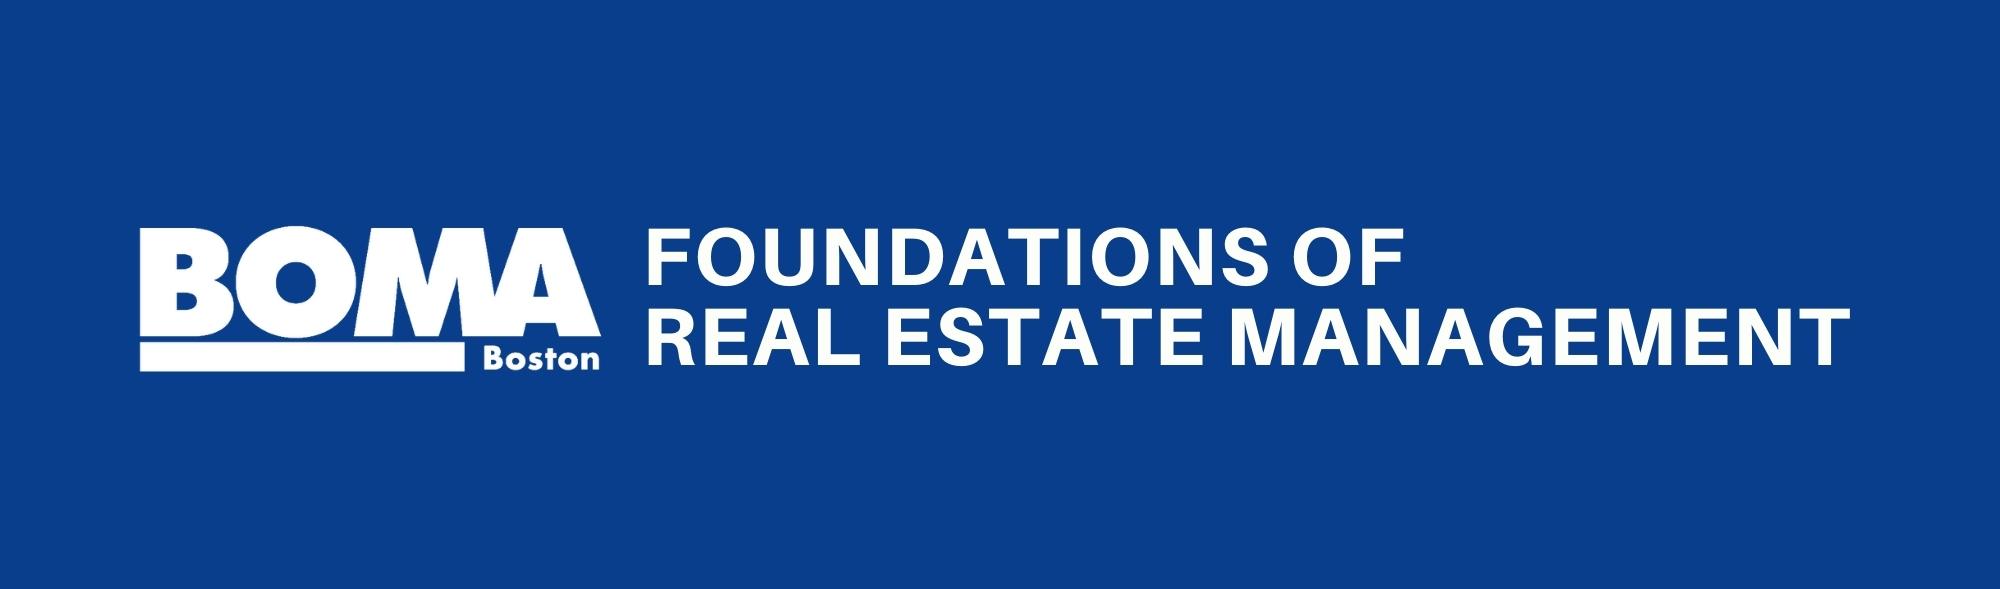 BOMA Foundations of Real Estate Management